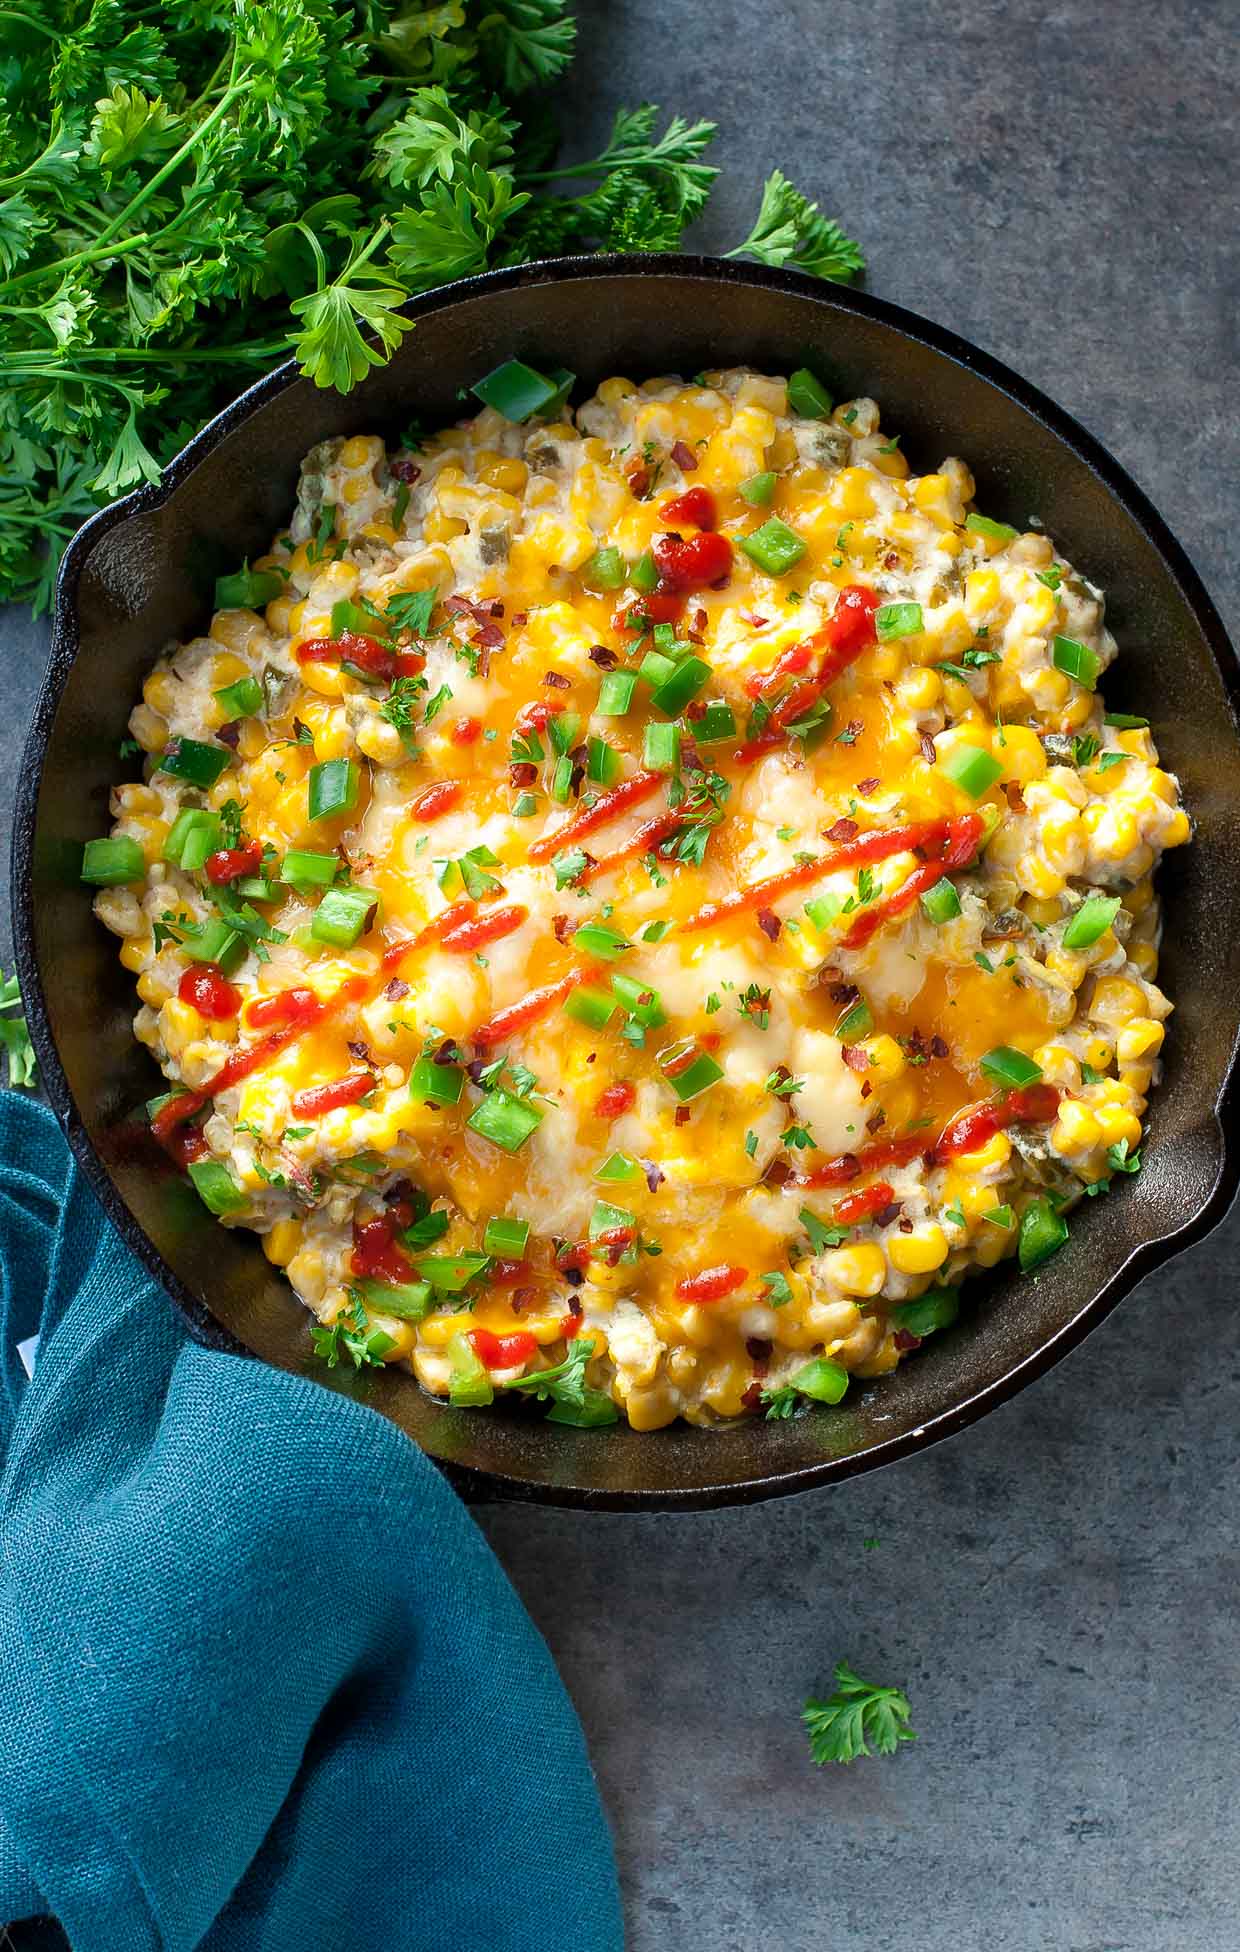 Spicy Southern hot corn dip recipe - Peas and Crayons